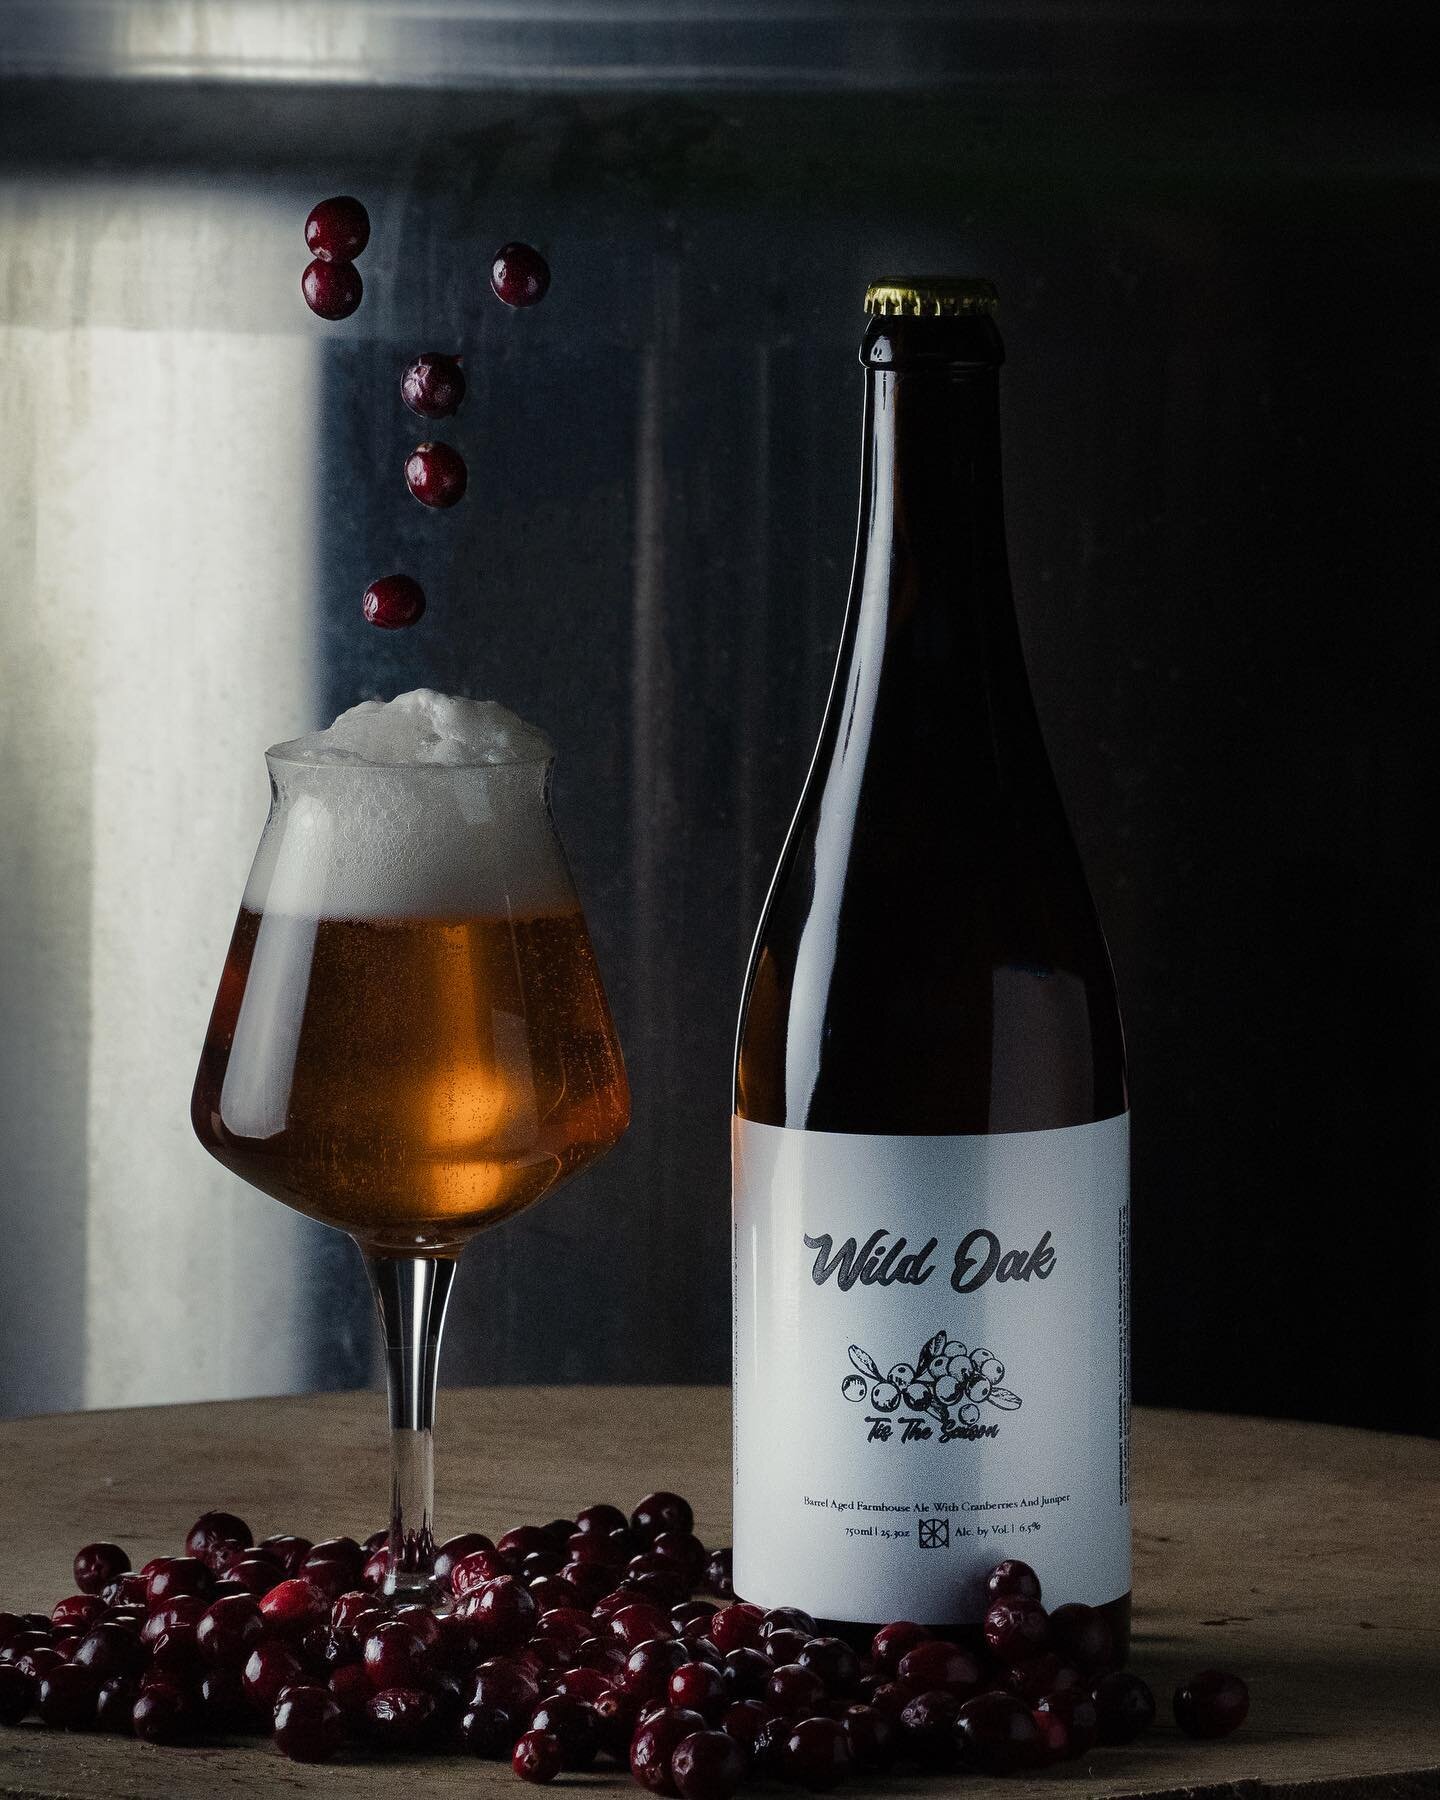 The holidays are upon us and it is a great time to look back on the year, spend time with those who are closest to you and toast to a new year! &ldquo;Tis the Saison&rdquo; was open fermented in oak then re-fermented with cranberries and juniper whic